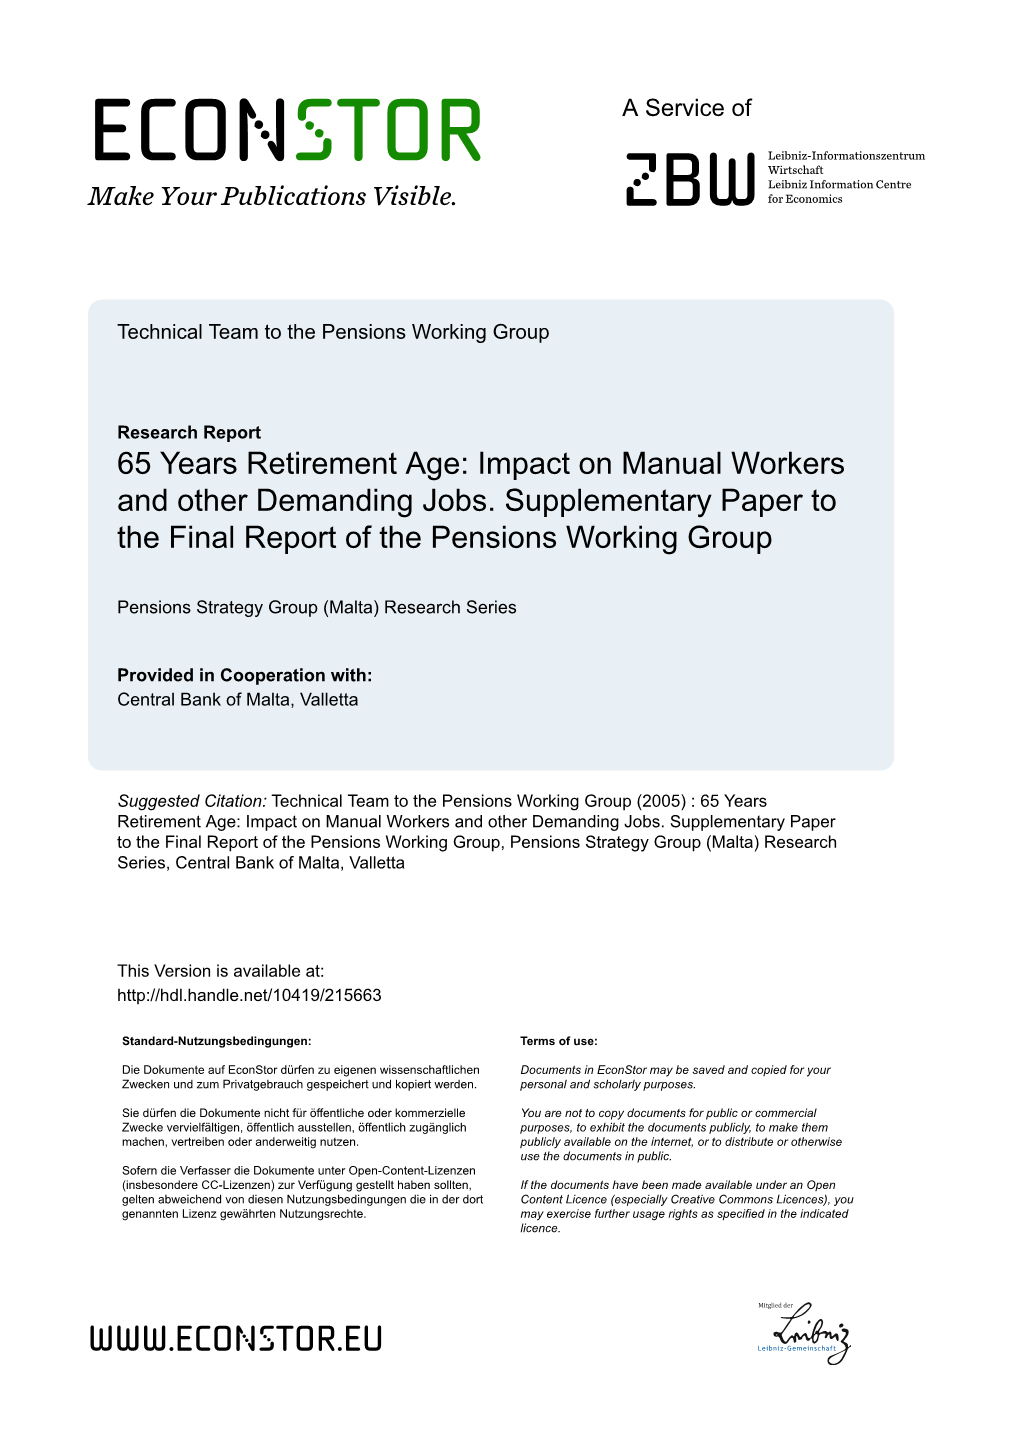 65 Years Retirement Age: Impact on Manual Workers and Other Demanding Jobs